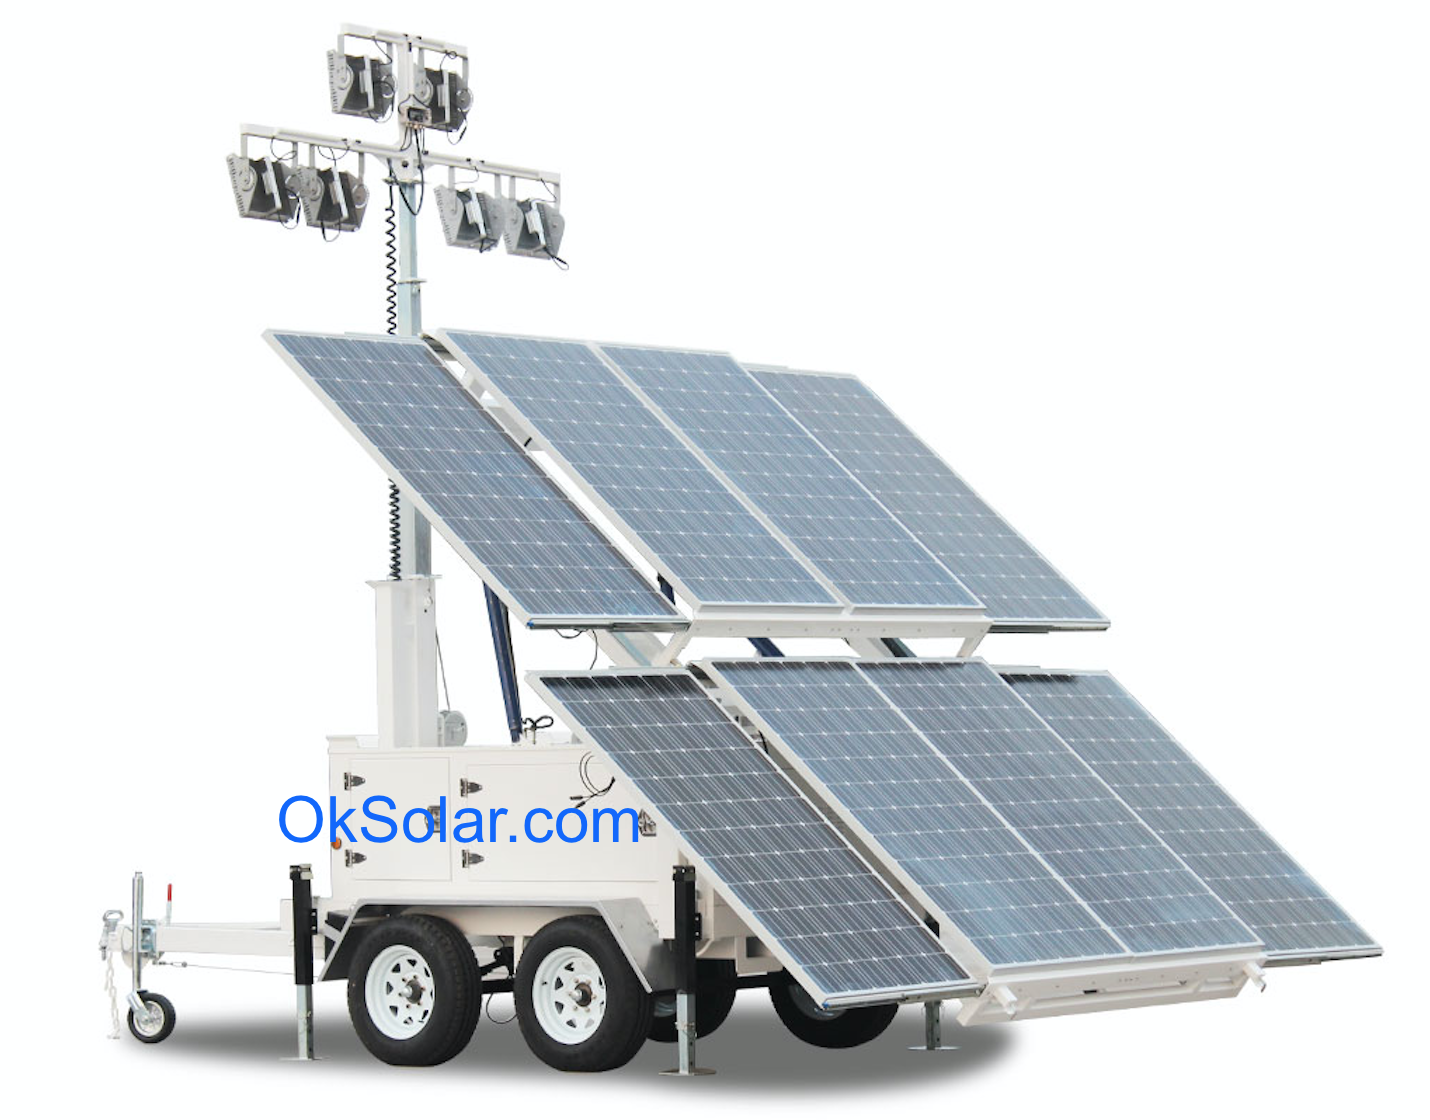 Remote and Off-Grid Solar Power Systems and Storage, Highway Infrastructure Off-Grid Solar Power, Remote and Off-Grid Solar Power Systems, Remote Solar Power, Remote Solar Power DC, Remote Solar Power AC, Solar Electric Supply, Off-Grid Solar Power, Solar Traffic Signs, Solar Powered Obstruction Light FAA approved L-810, Solar 24 Hour Flashing Light, Solar LED Rectangular Rapid Flashing Beacon, Off-grid solar electric power systems, off-grid solar power systems, Off Grid And Stand Alone Solar Power Systems, Complete Solar Systems, Solar Hybrid Power Systems, Off-Grid Solar Systems, Outdoor Rated Battery Backup Systems, AC & DC Backup Power Systems, Remote Solar Power Supply, Remote Solar Power Supply, Industrial Solar Power Supply, Remote Solar Power Supply,  Solar power supply, Solar powered Generator, Remote Solar powered, Off Grid Solar Energy, Solar Powered SCADA, Solar Energy, Solar Battery, Solar Trailer, Solar Powered Cathodic Protection, Portable Solar Power Generator System, Solar LED Street and Parking Lot Lights, Disaster Relief Solar Light Tower
